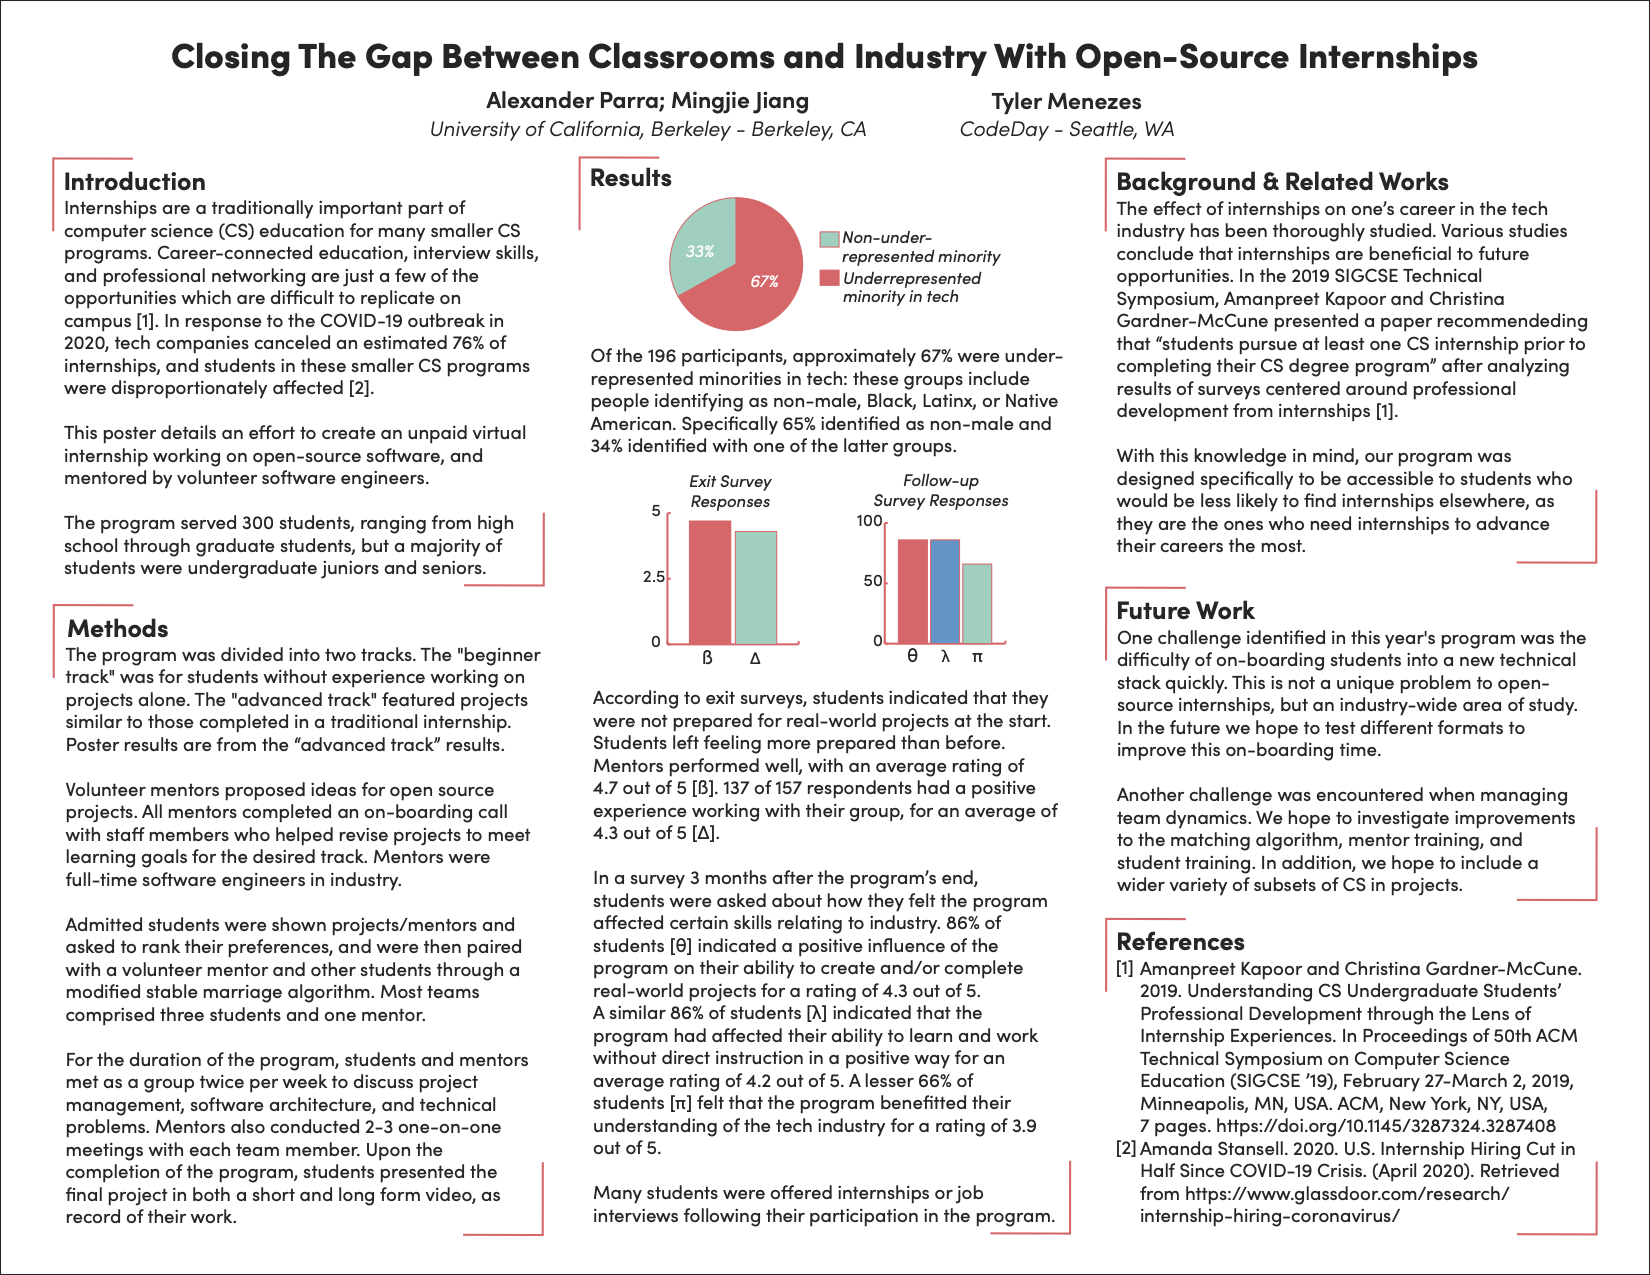 Image showing the poster submitted into SIGCSE TS 2021 by Alexander Parra and Mingjie Jiang